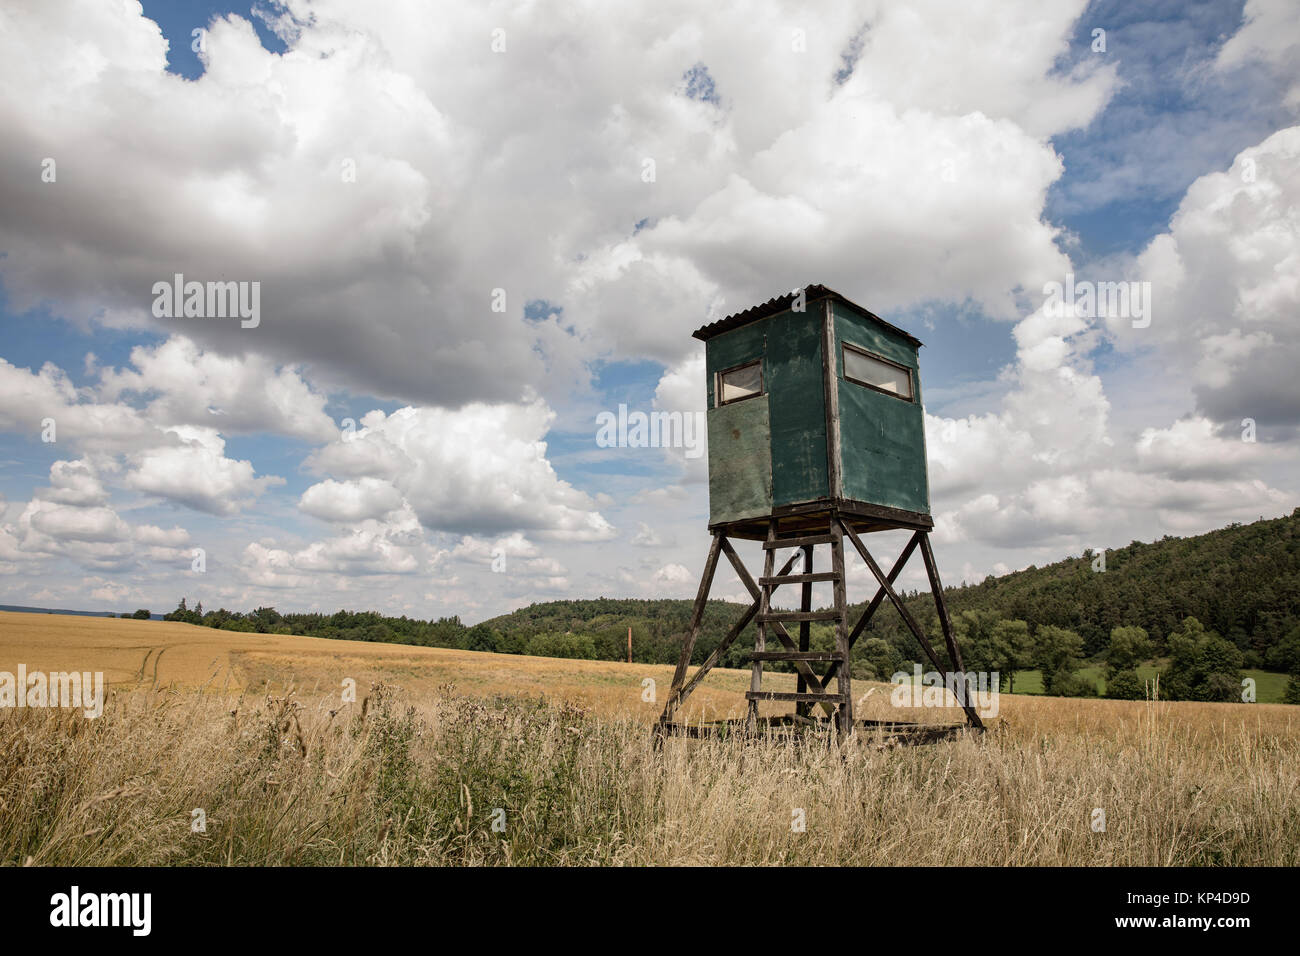 Animal watching tower on field. Sky with clouds. Stock Photo